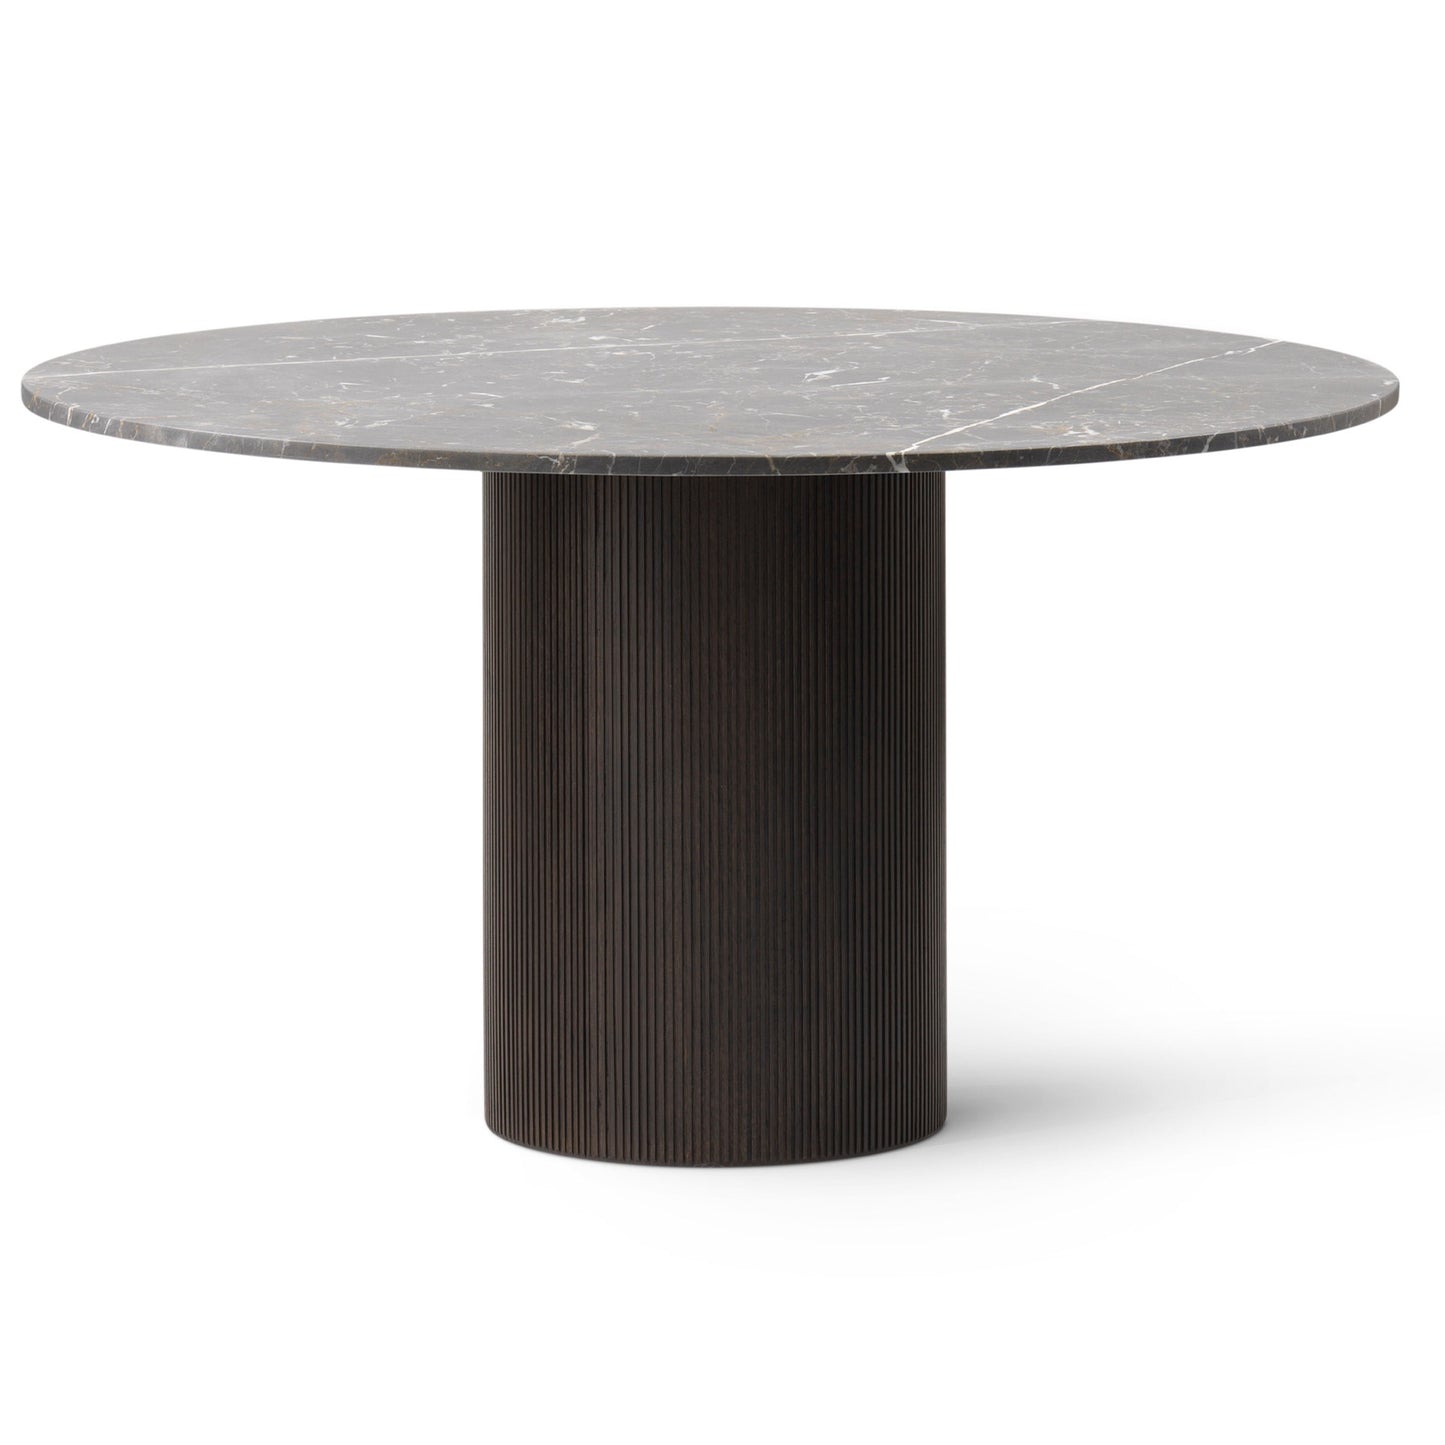 Cabin Round Table